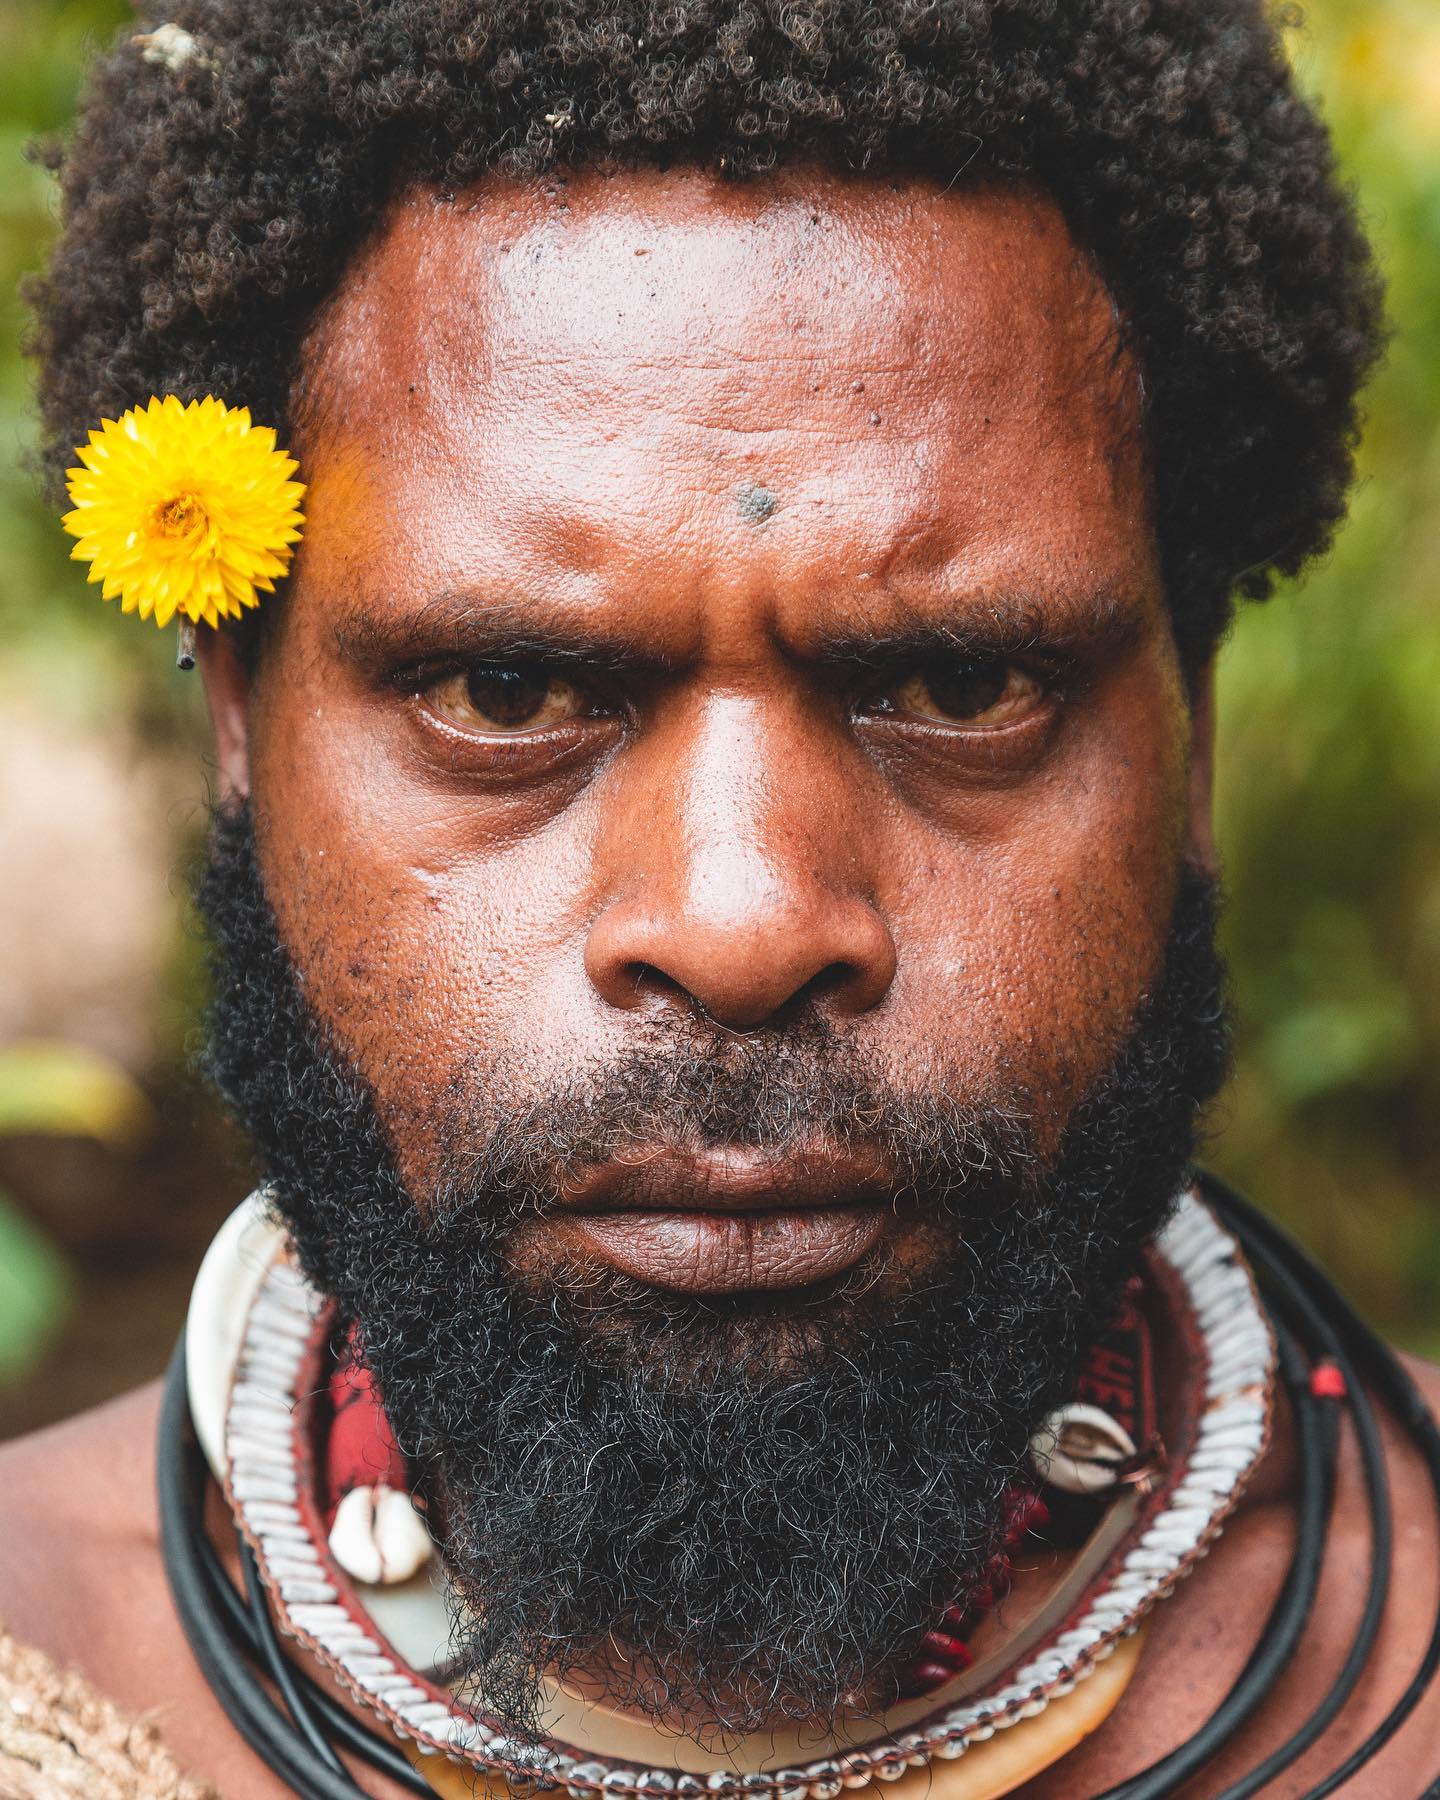 I think the flower makes this Huli wigman in Papua New Guinea look a little less intimidating.